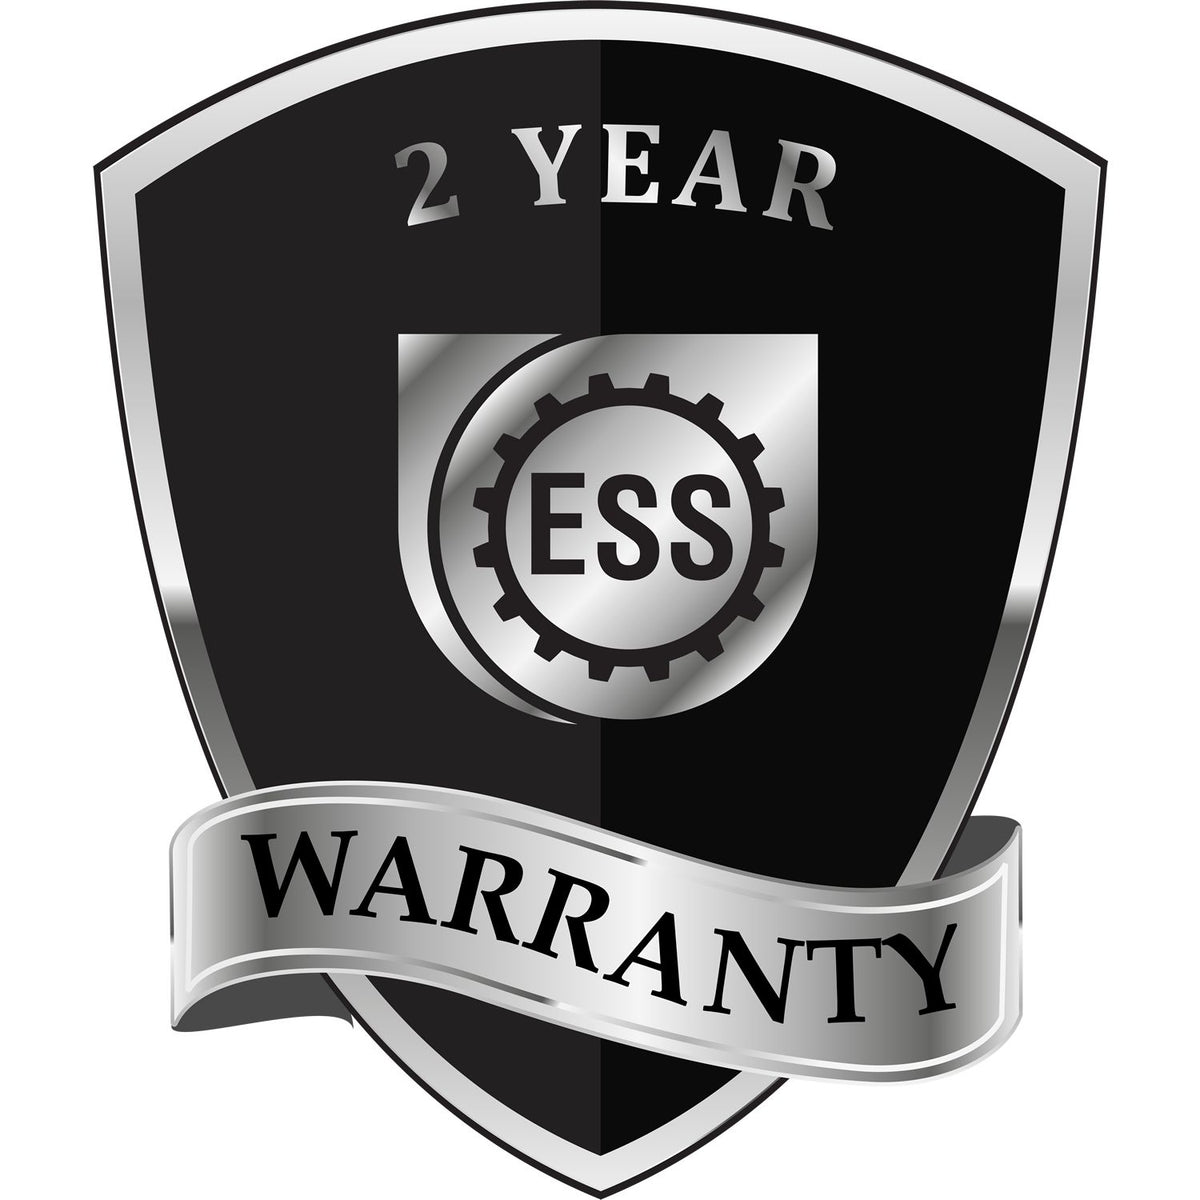 A black and silver badge or emblem showing warranty information for the State of Indiana Extended Long Reach Geologist Seal